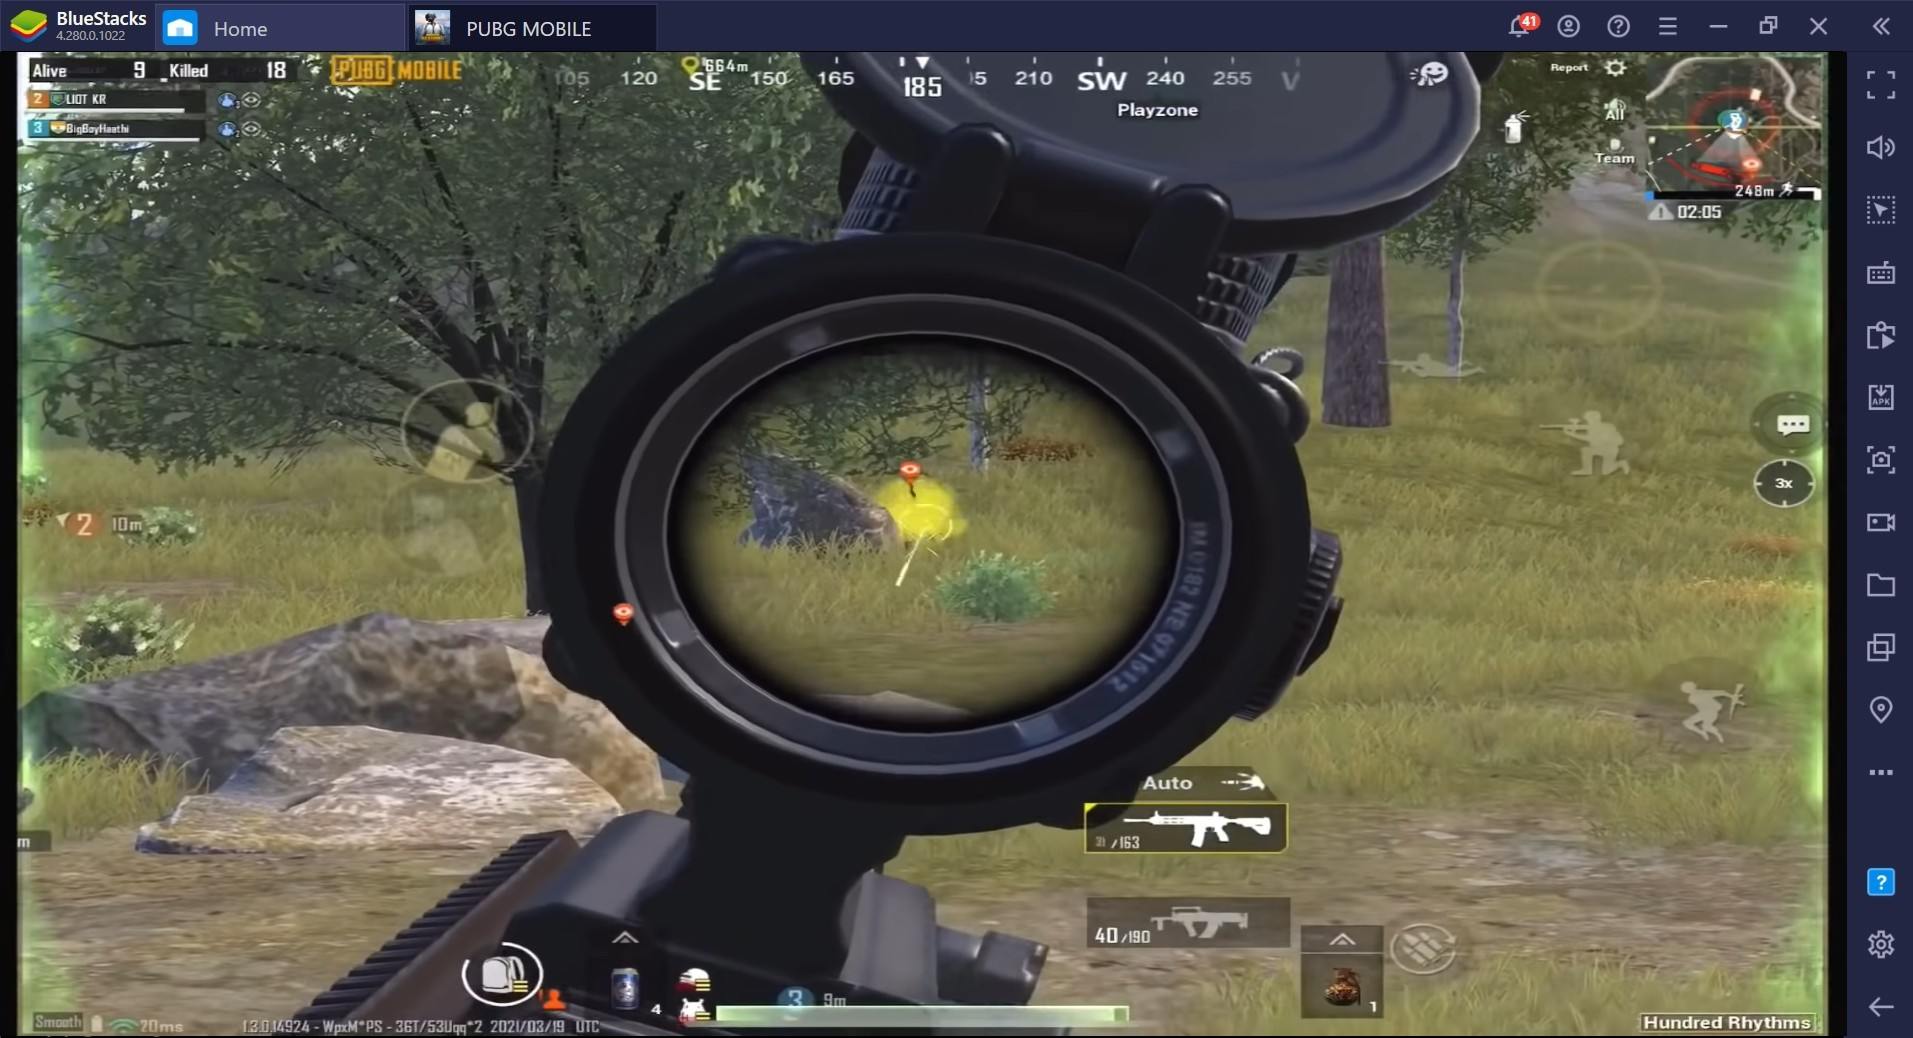 PUBG Mobile: BlueStacks Guide to Playing in Rozhok